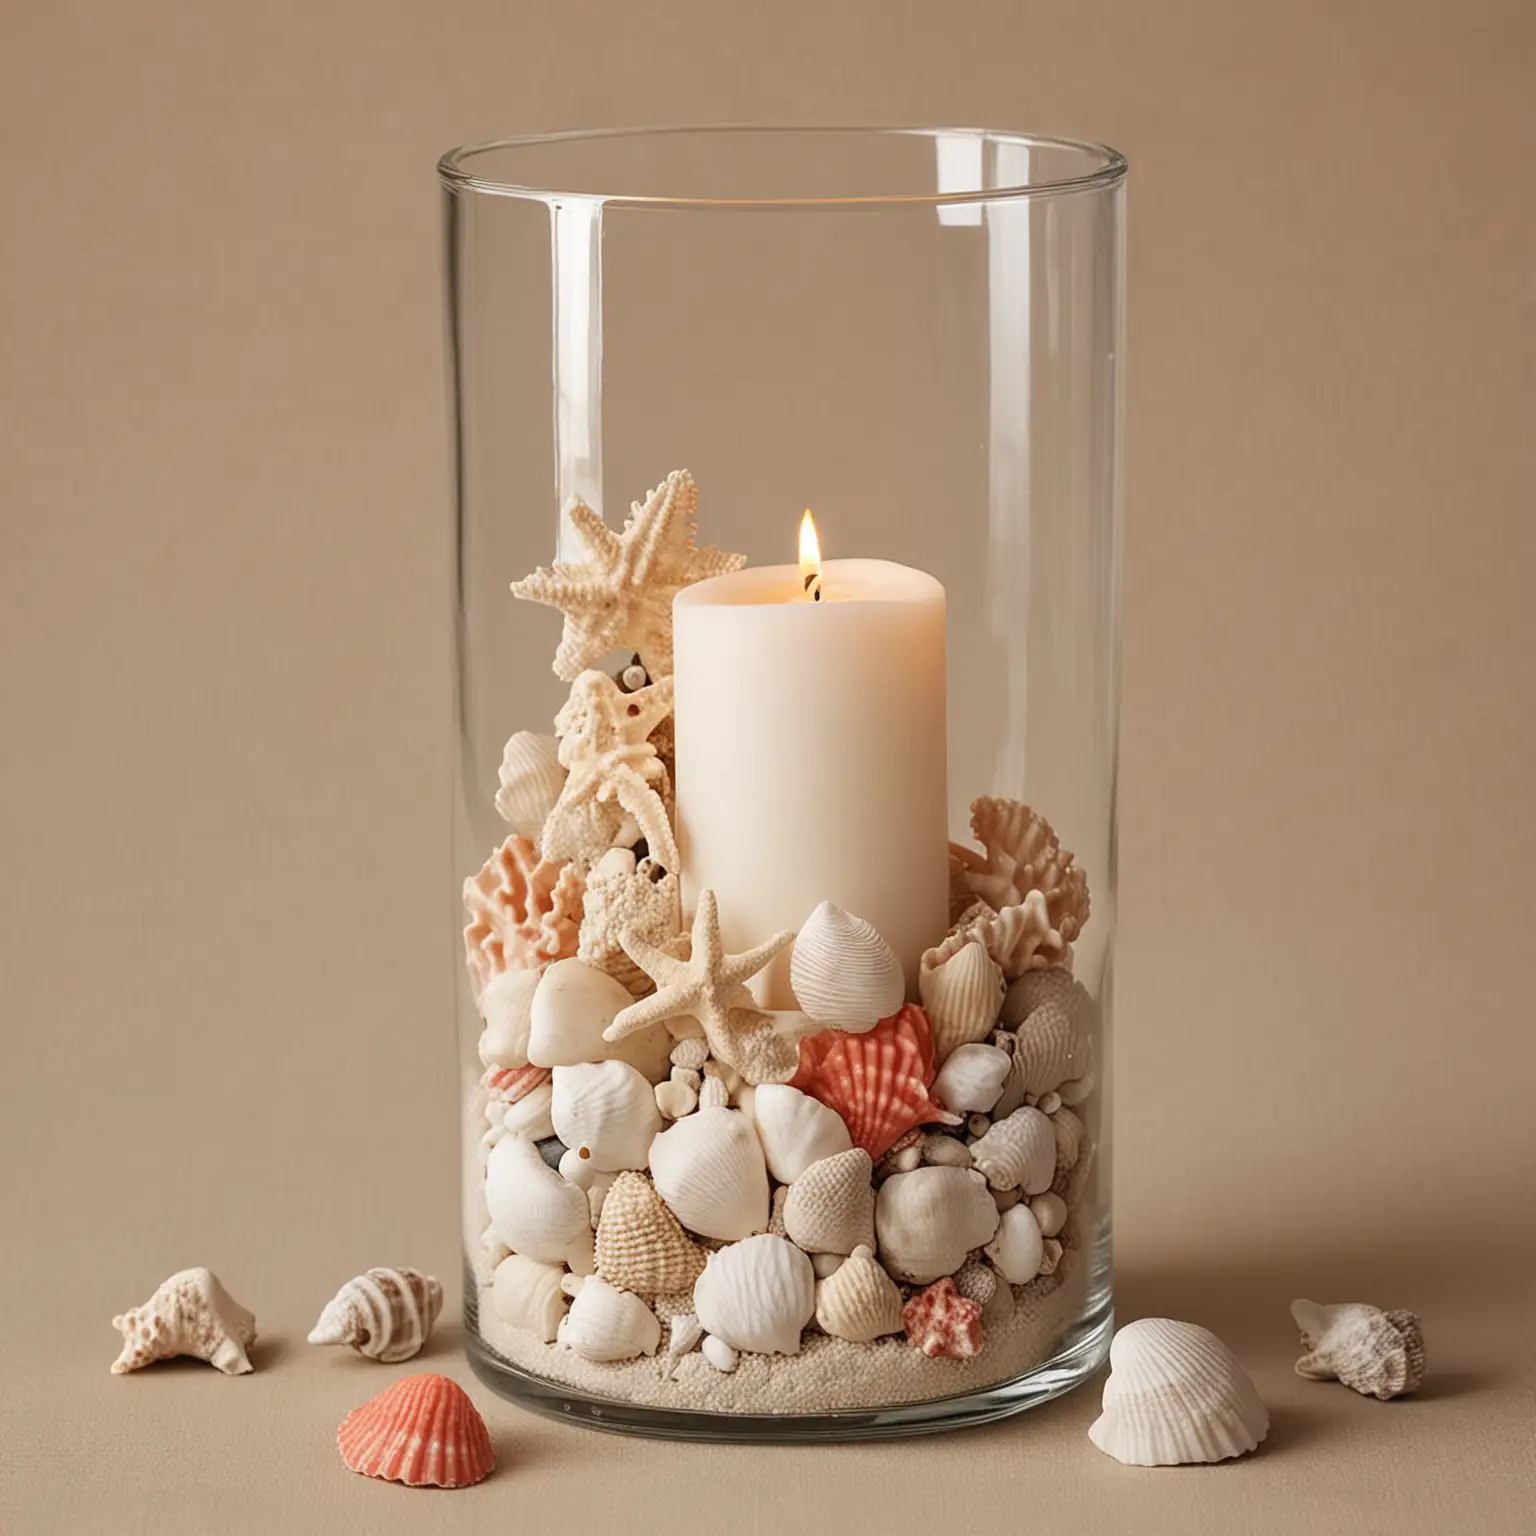 DIY-Wedding-Centerpiece-Cylinder-Vase-with-Sand-Seashells-and-Coral